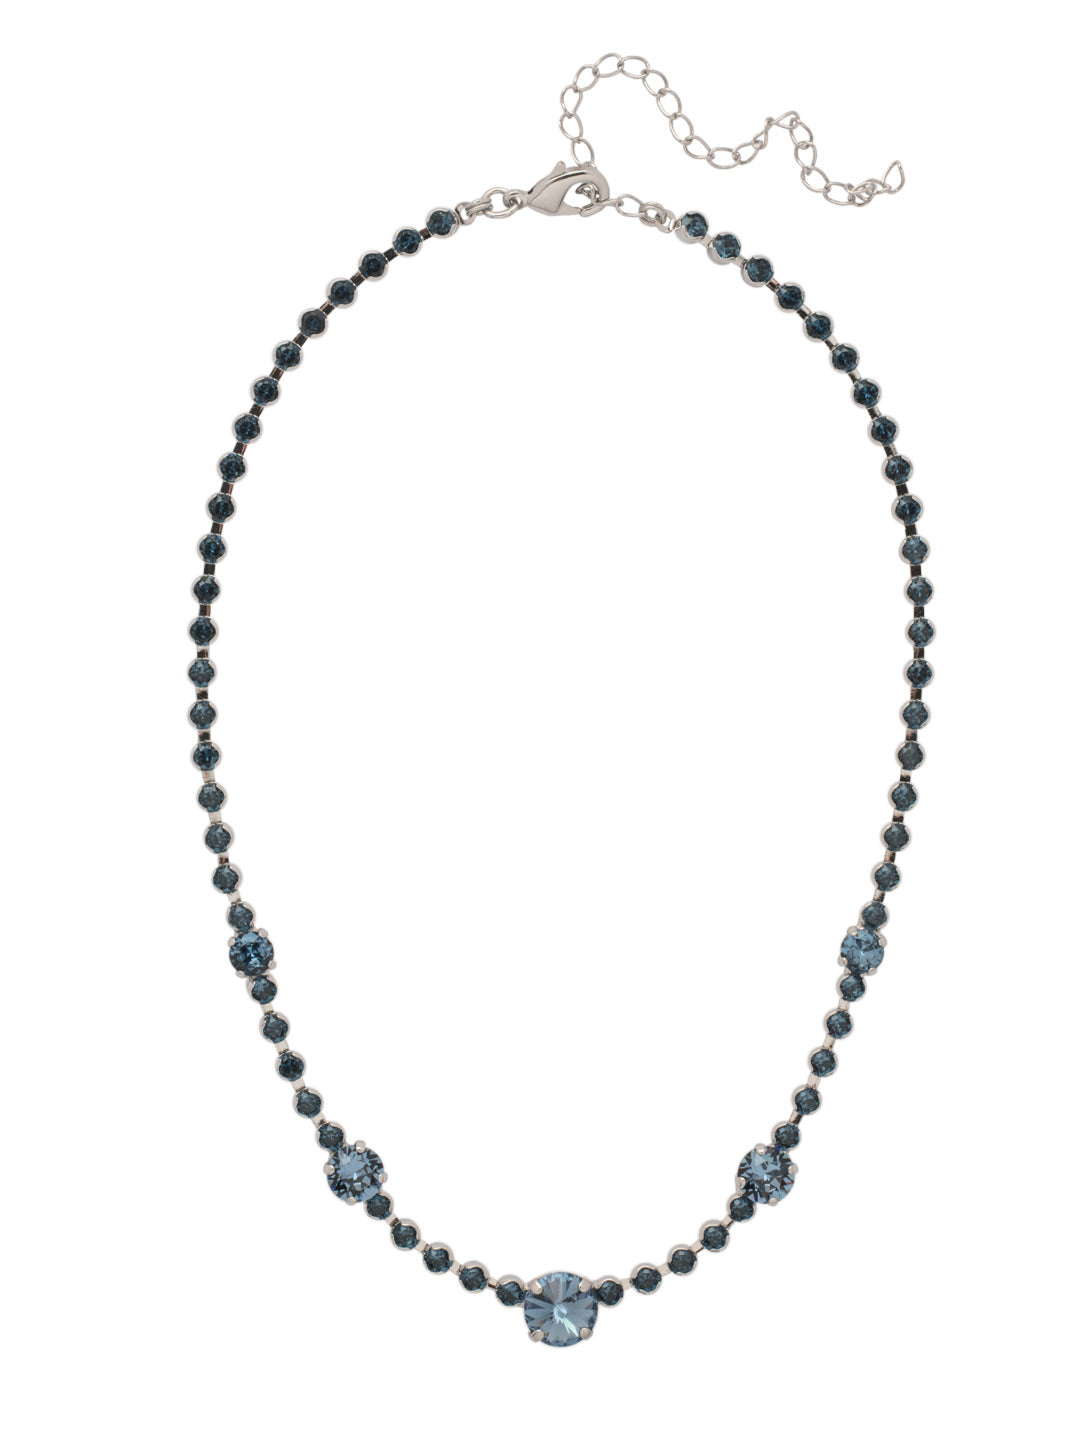 Hazel Tennis Necklace - NFL9PDASP - <p>The Hazel Tennis Necklace features an adjustable crystal embellished chain with round and rivoli cut accent crystals, secured with a lobster claw clasp. From Sorrelli's Aspen SKY collection in our Palladium finish.</p>